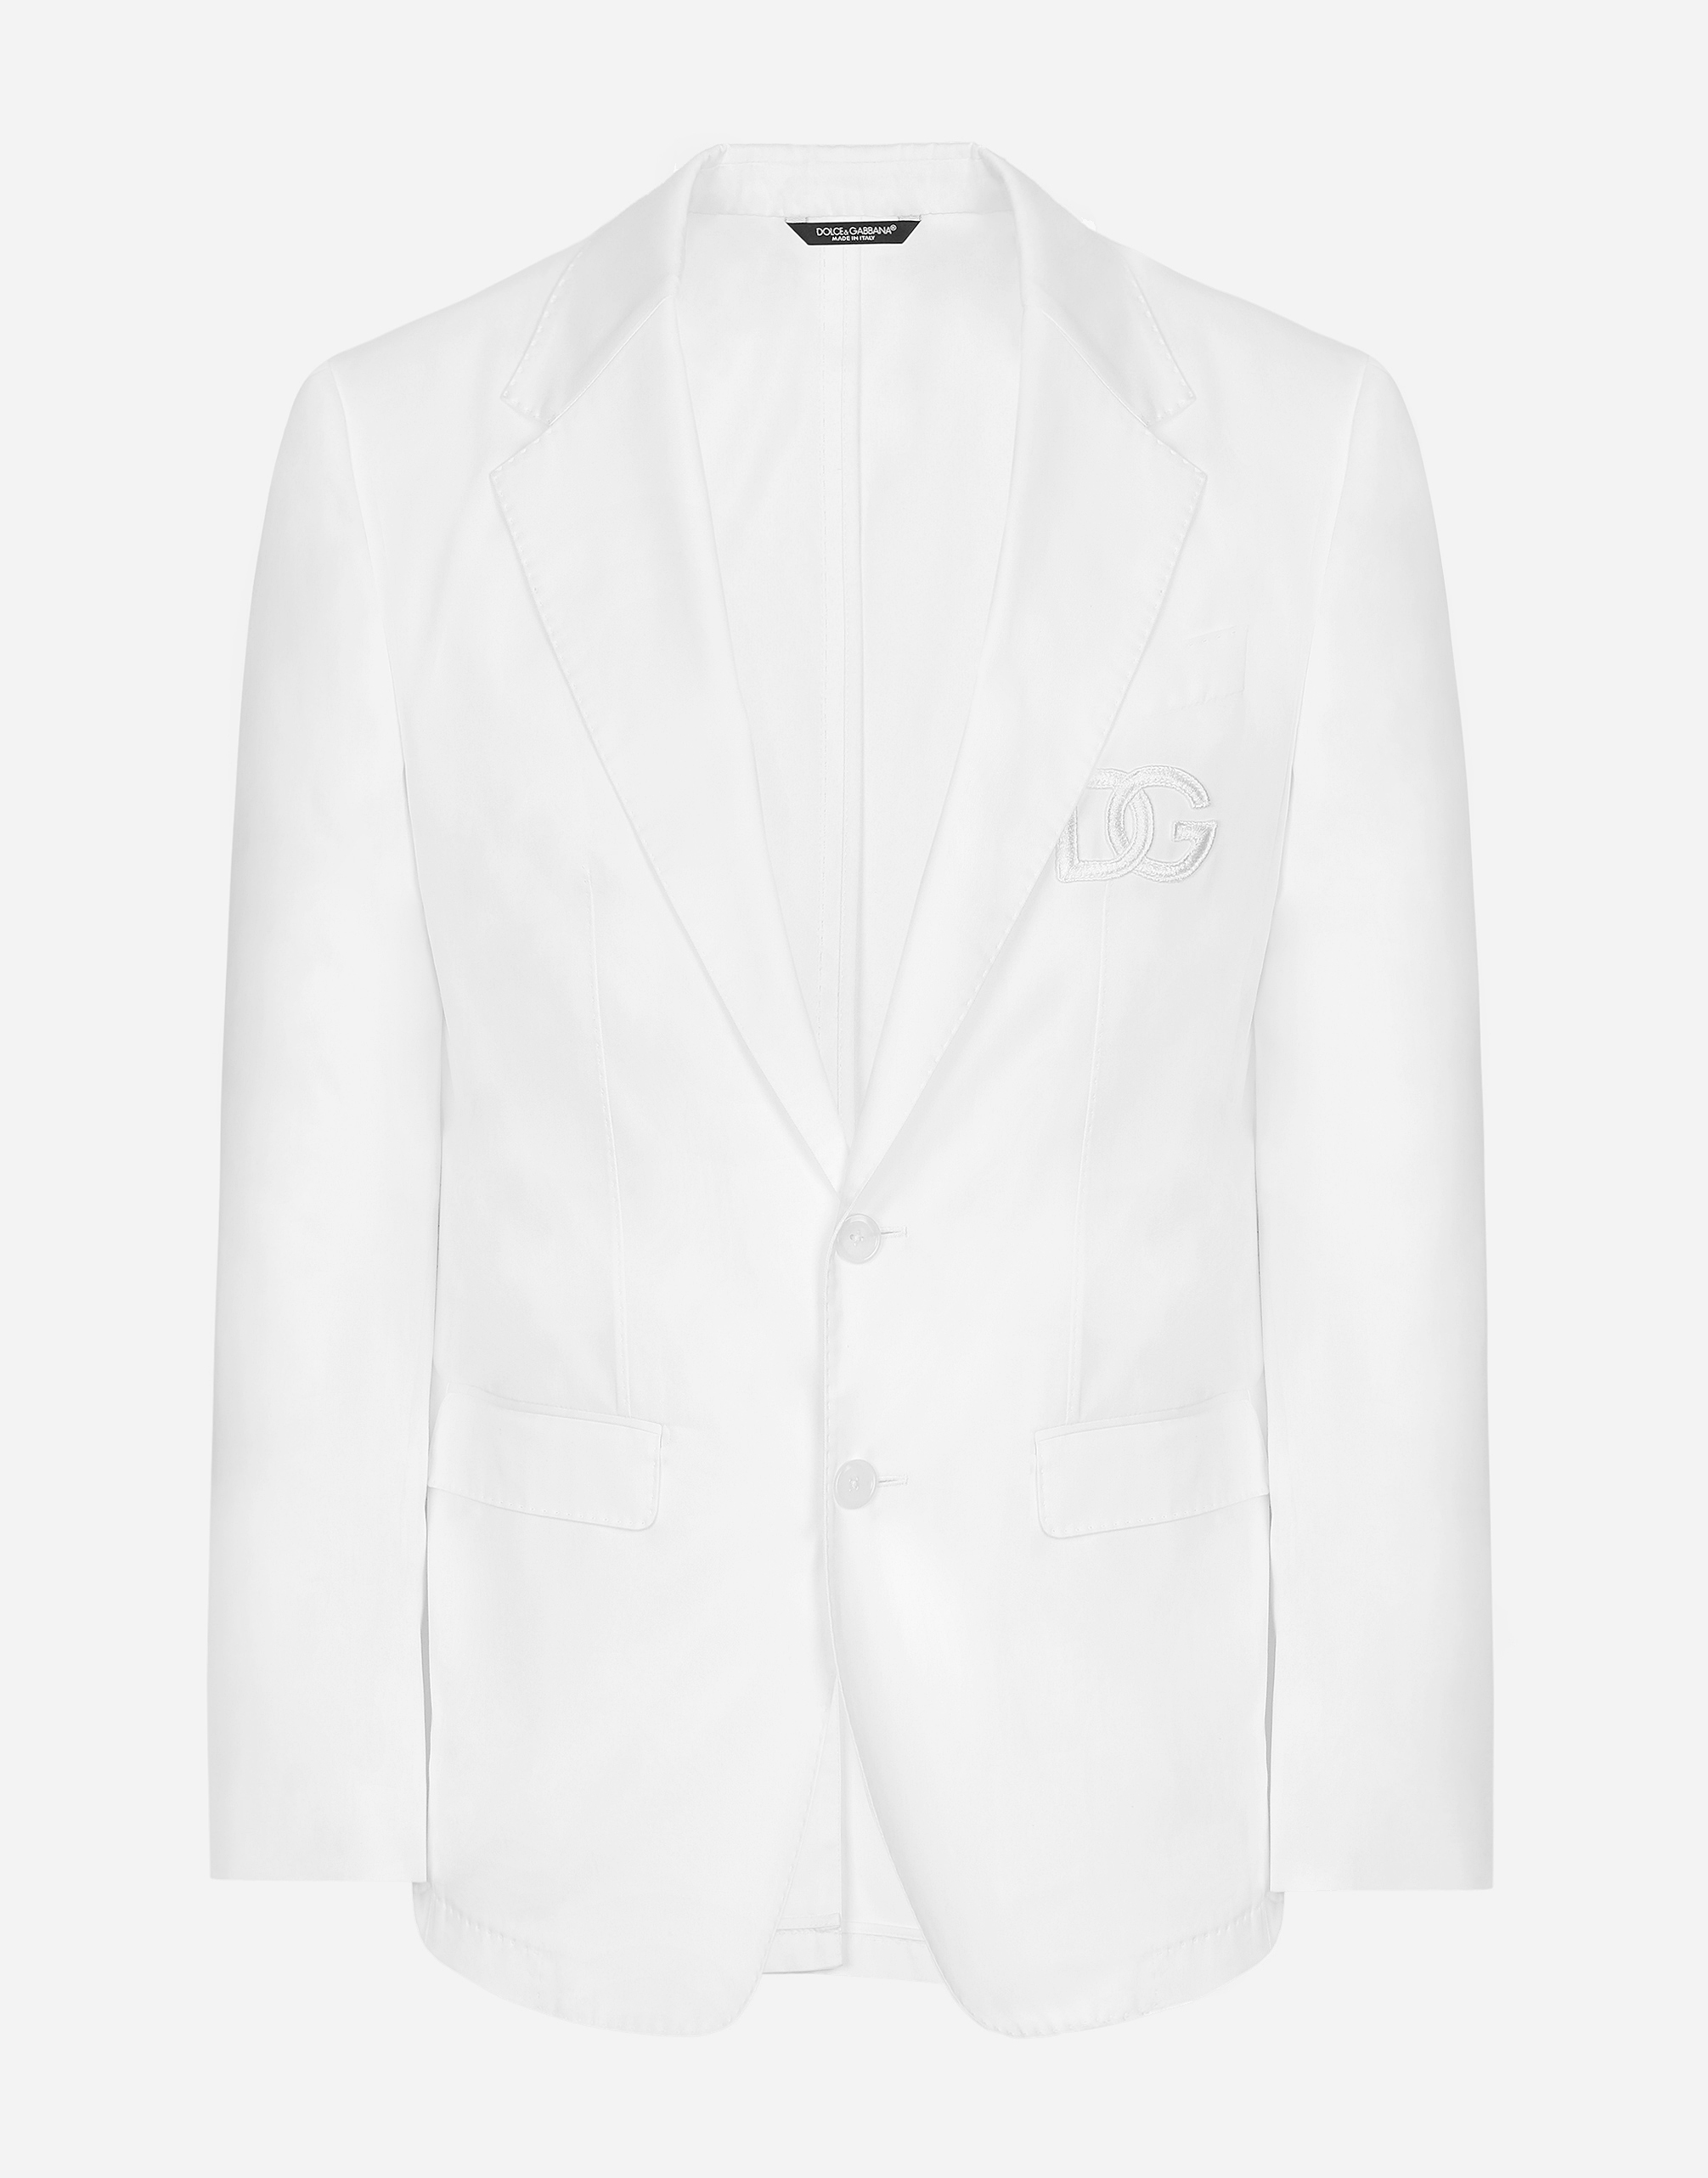 Single Breasted Cotton Taormina Jacket With Dg Patch In White For Men Dolceandgabbana® 